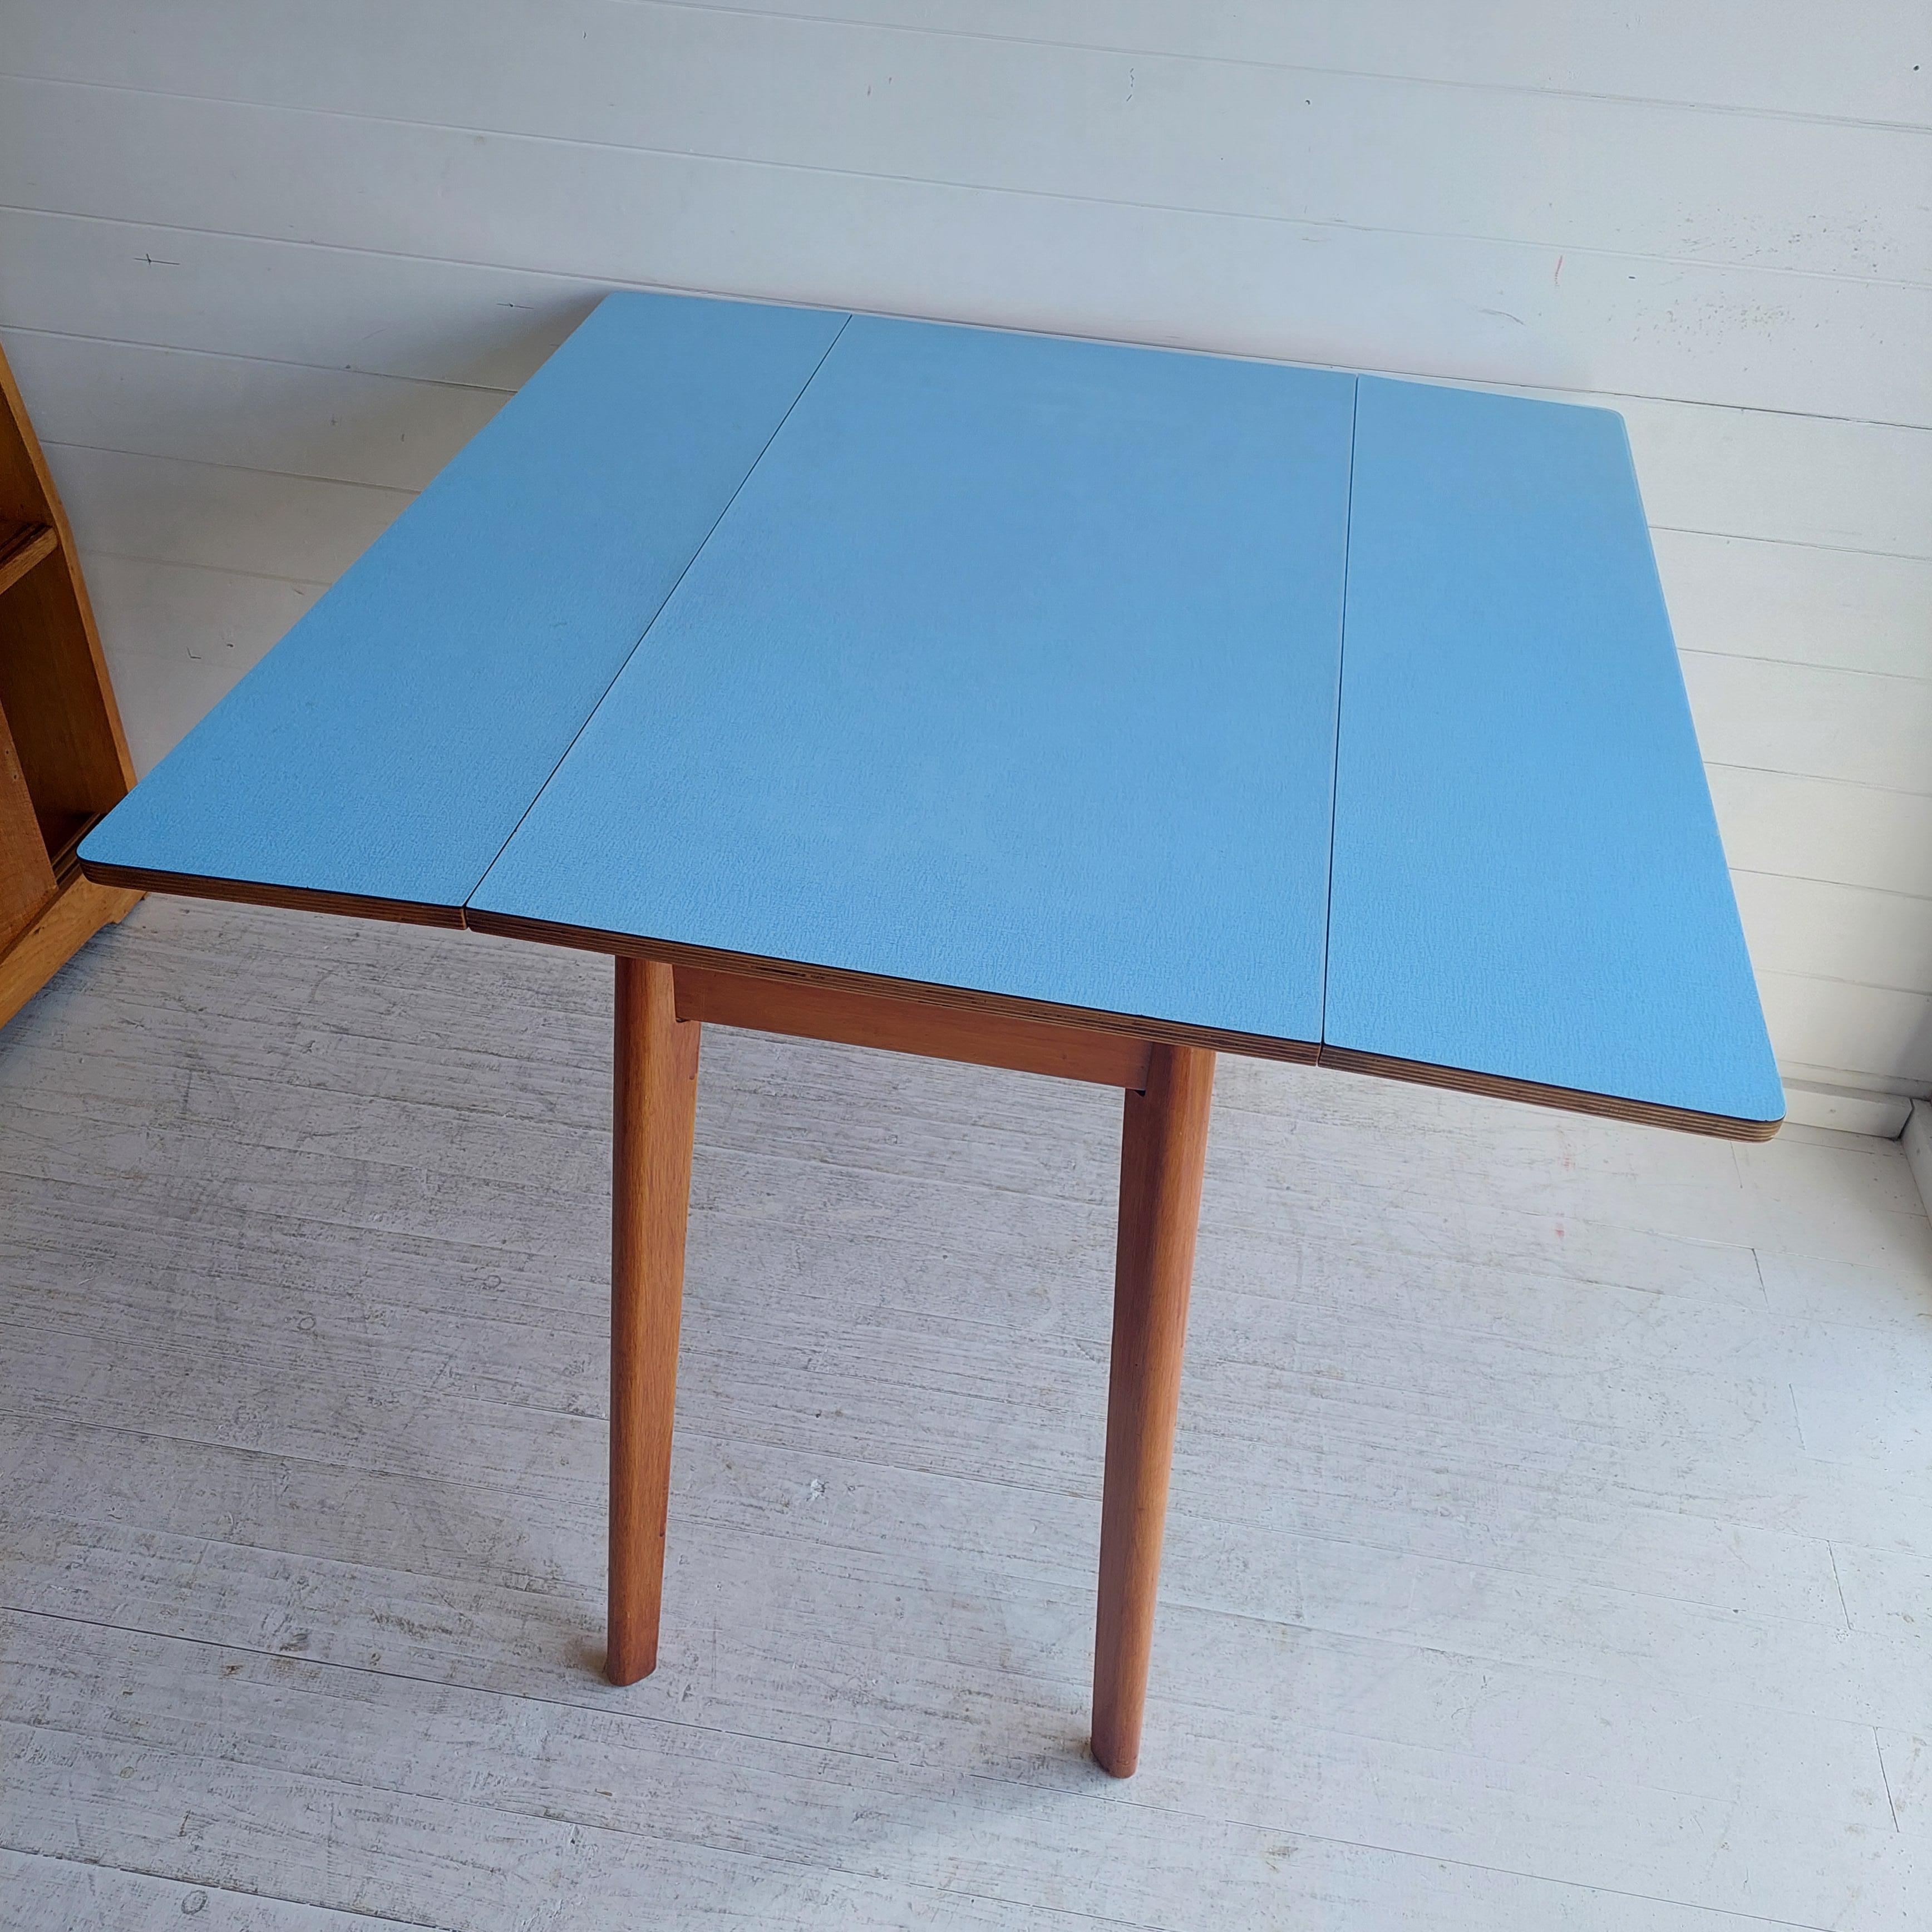 European Mid Century Blue Formica Drop Leaf Kitchen Dining Table With Wooden Legs 60s For Sale